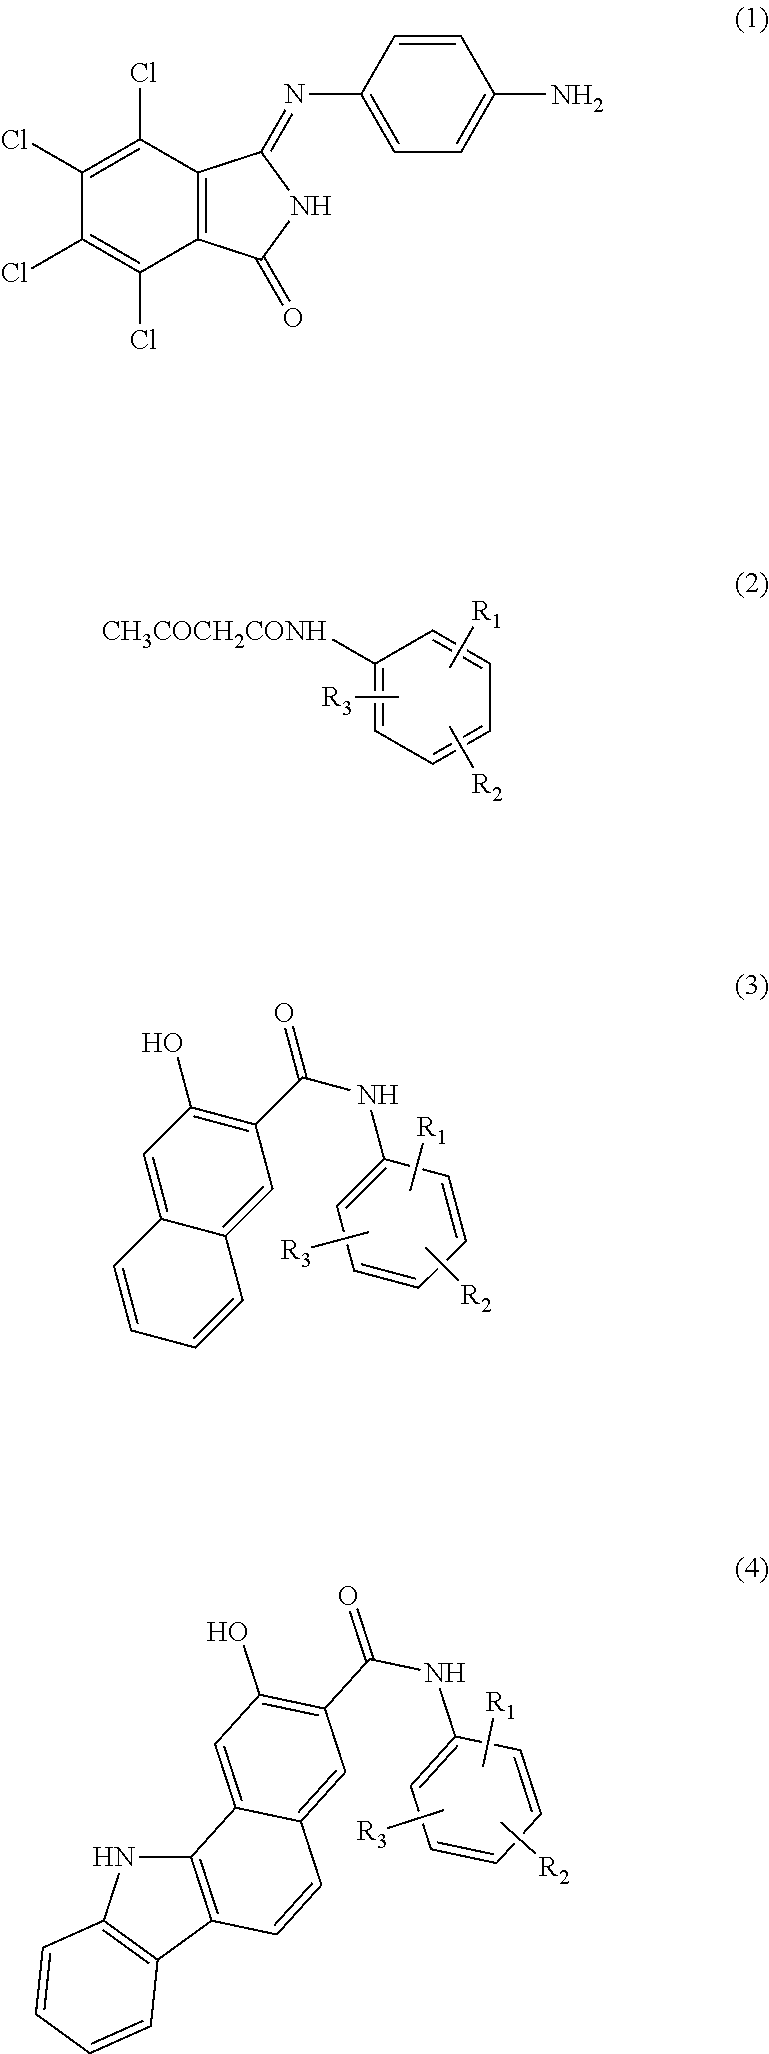 Near infrared-reflecting/transmitting azo pigment, method for manufacturing near infrared-reflecting/transmittingazo pigment, colorant composition using said azo pigments, item-coloring method and colored item